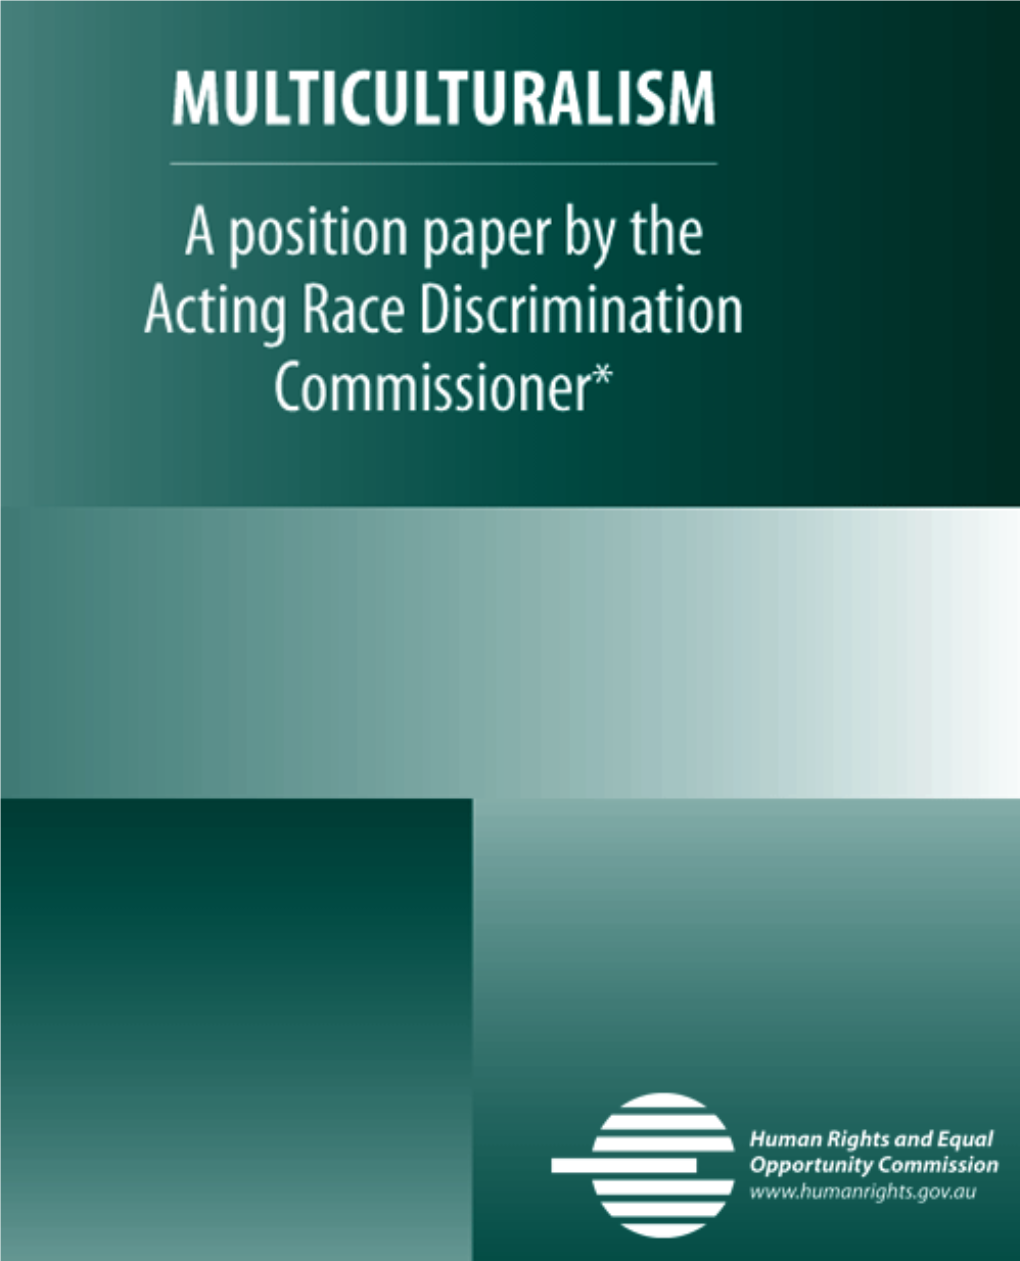 Multiculturalism, a Position Paper by the Acting Race Discrimination Commissioner